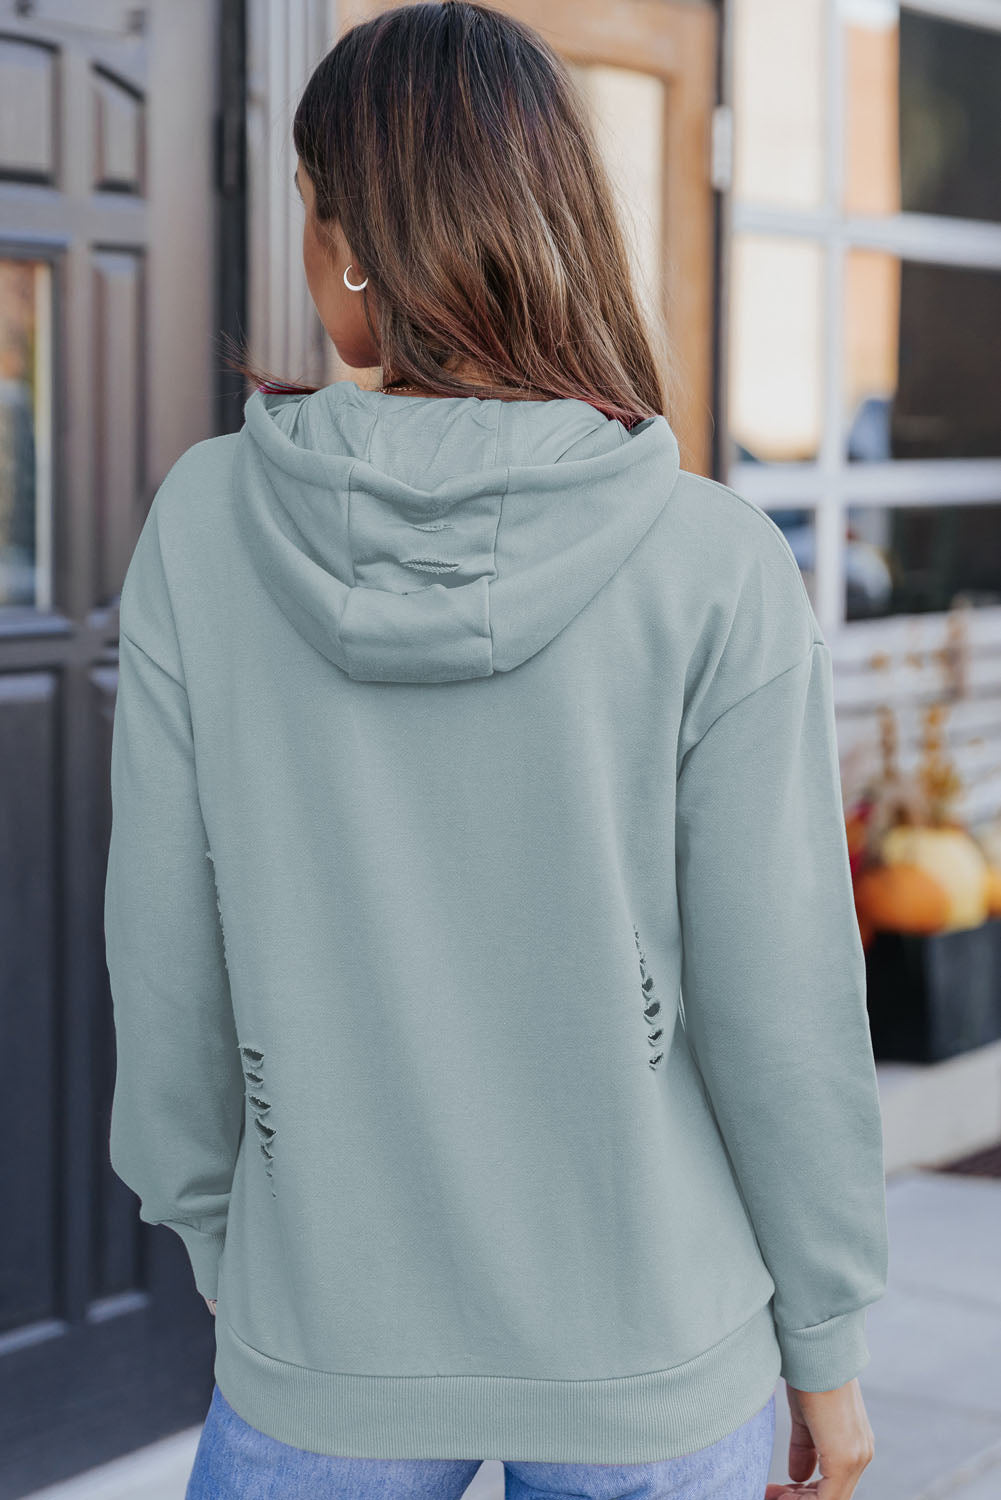 Cutout Dropped Shoulder Hoodie - Women’s Clothing & Accessories - Shirts & Tops - 12 - 2024